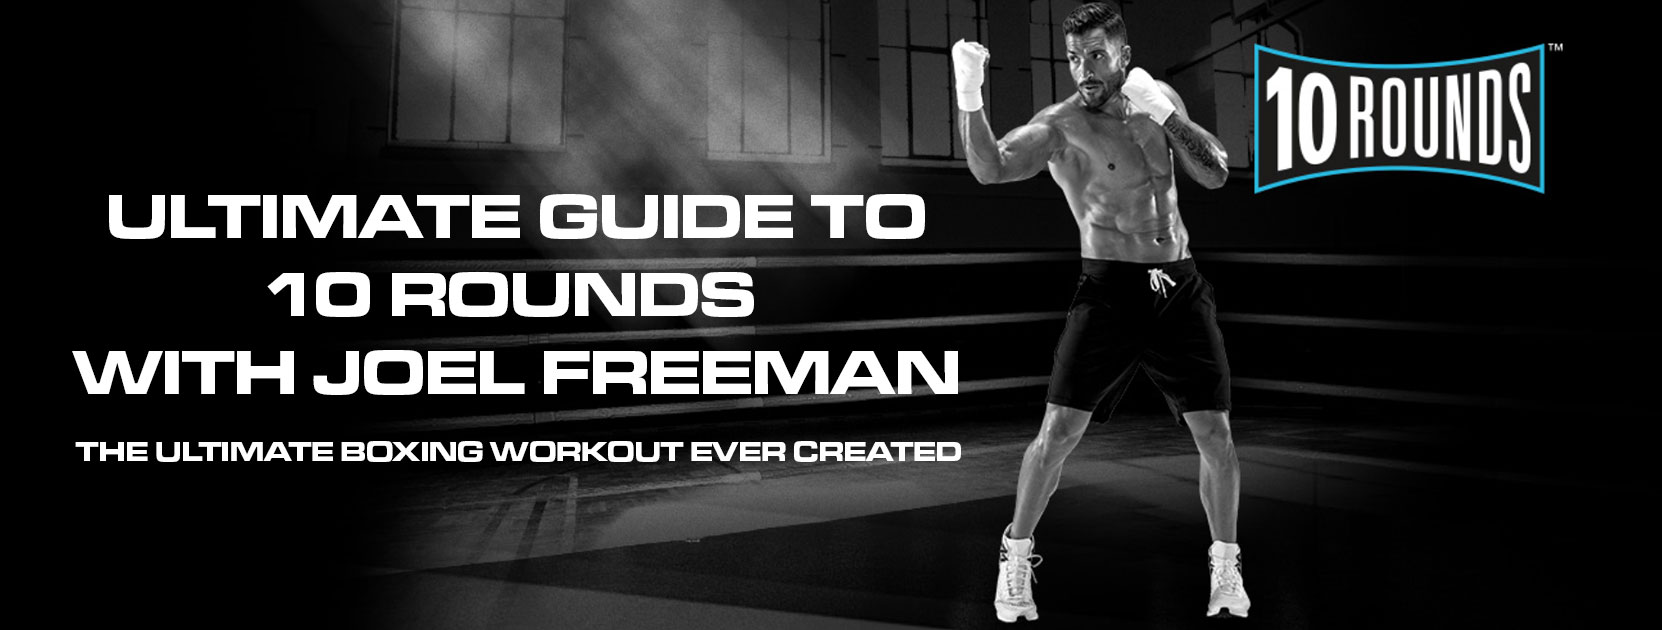 10 Rounds Workout Review